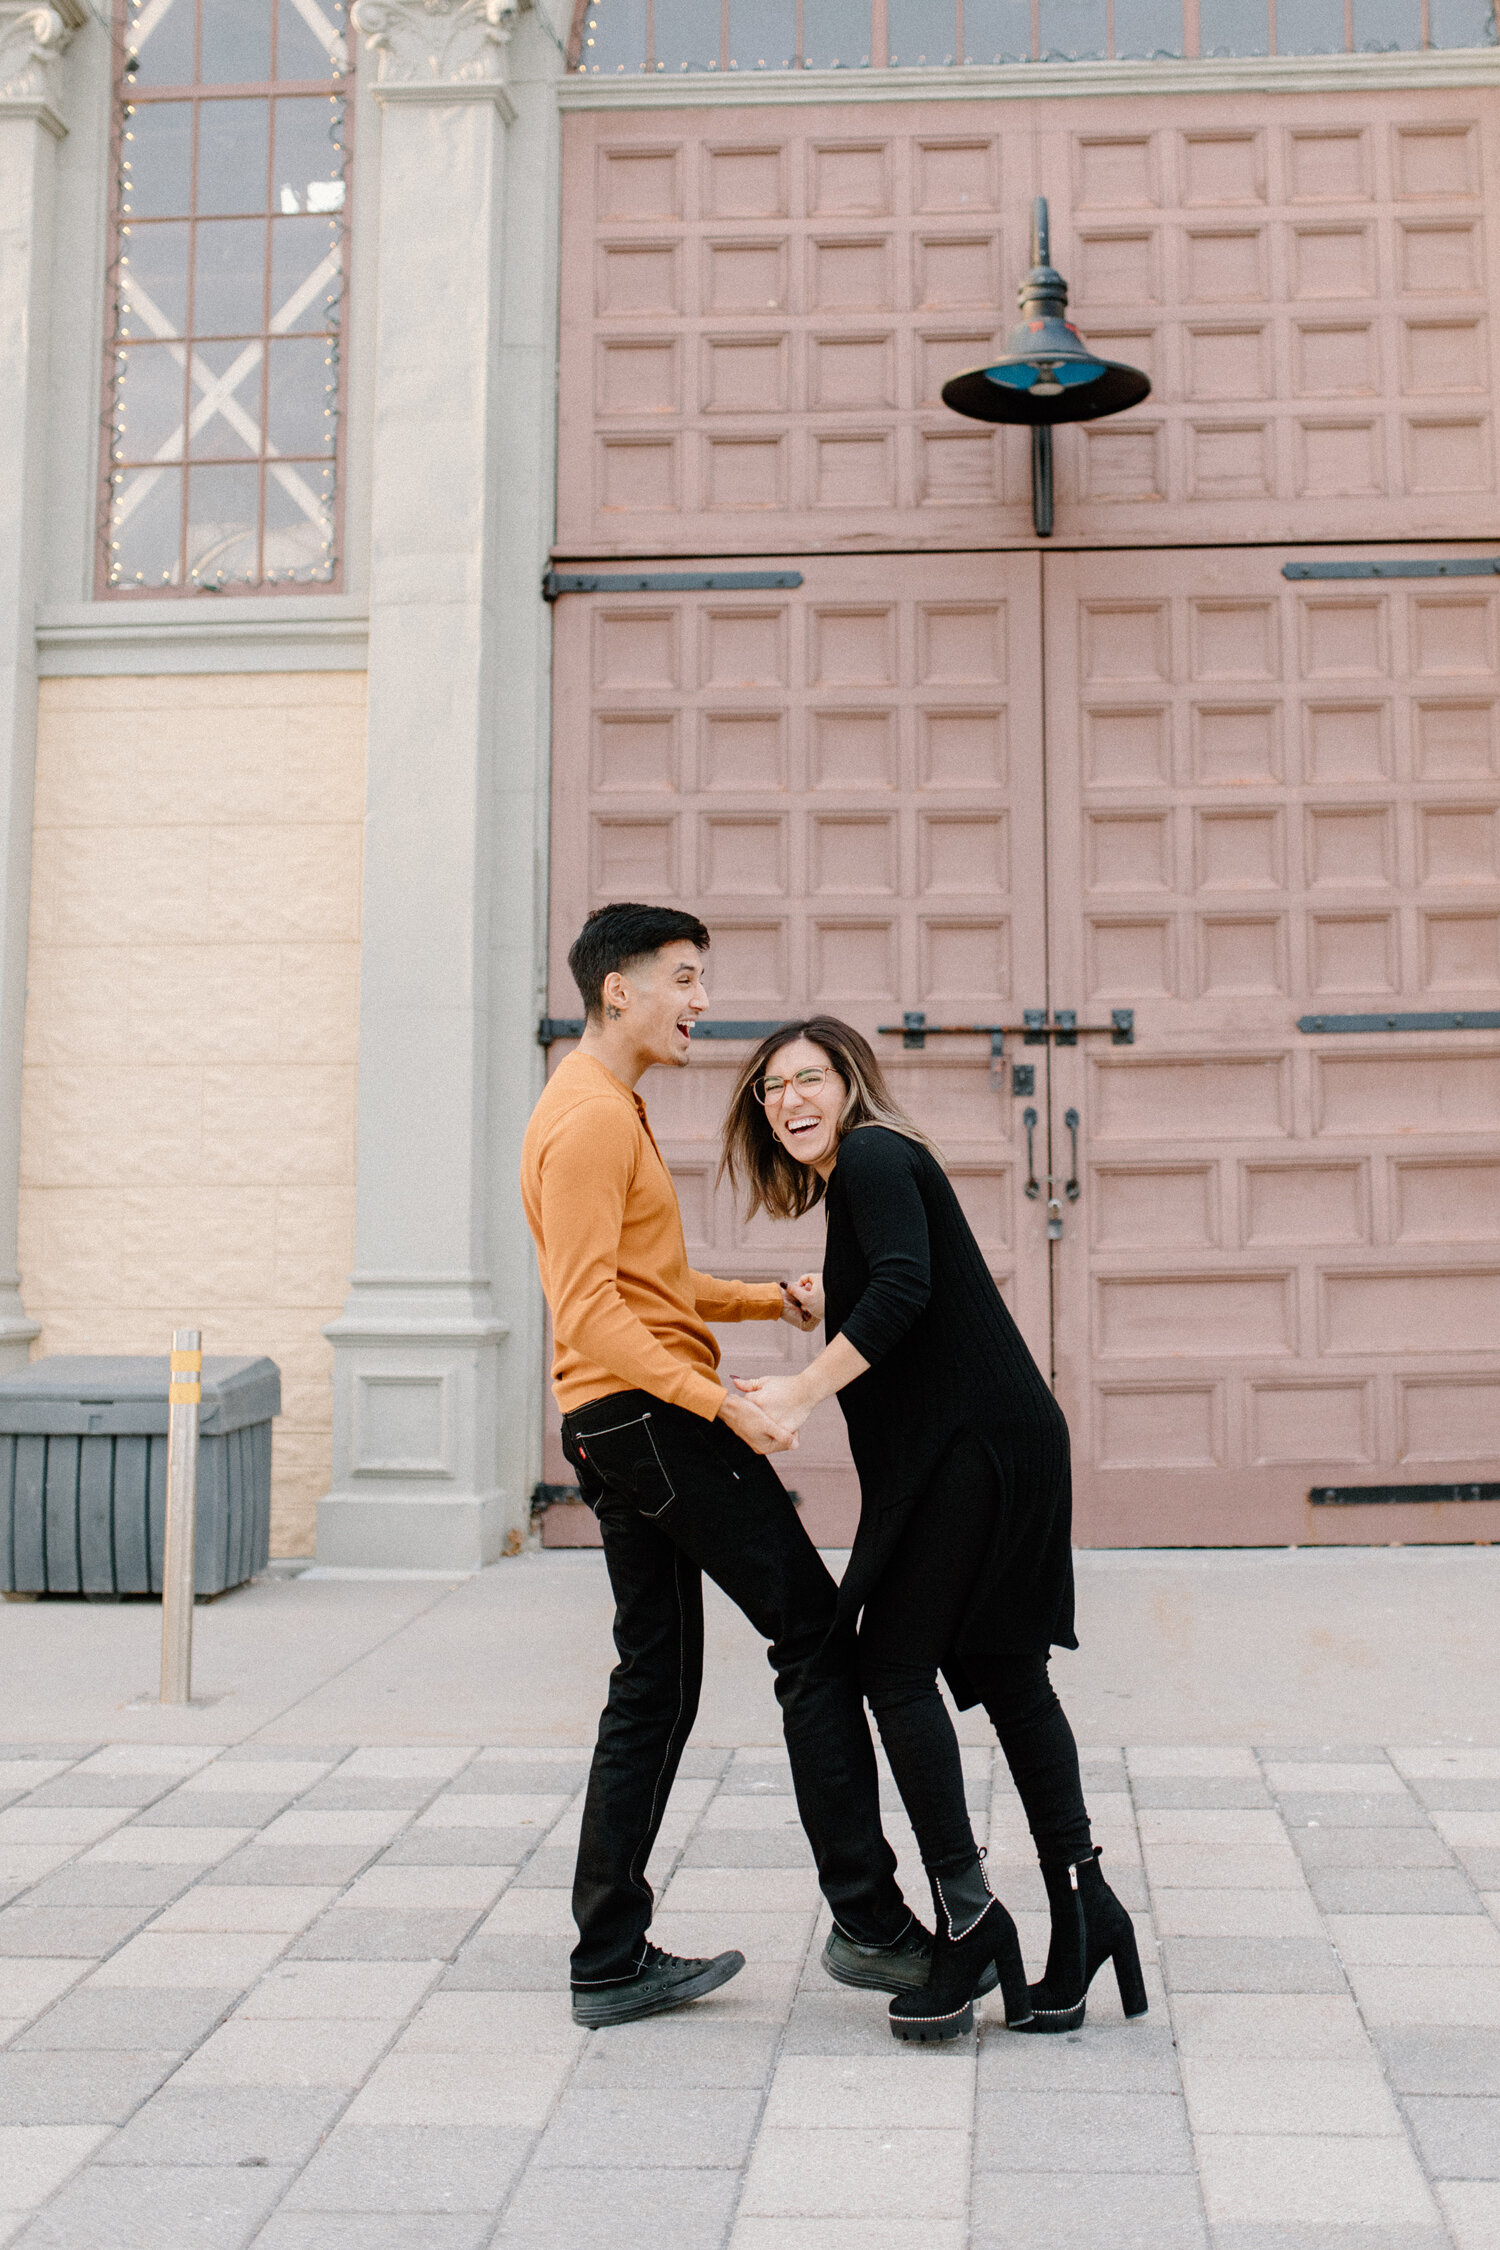  Chelsea Mason Photography captures this engaged couple holding hands outside the Ottawa, Canada Horticulture building. couple playfully holding hands womens all black outfit womens suede high heel booties mens orange and black outfit alternative cou